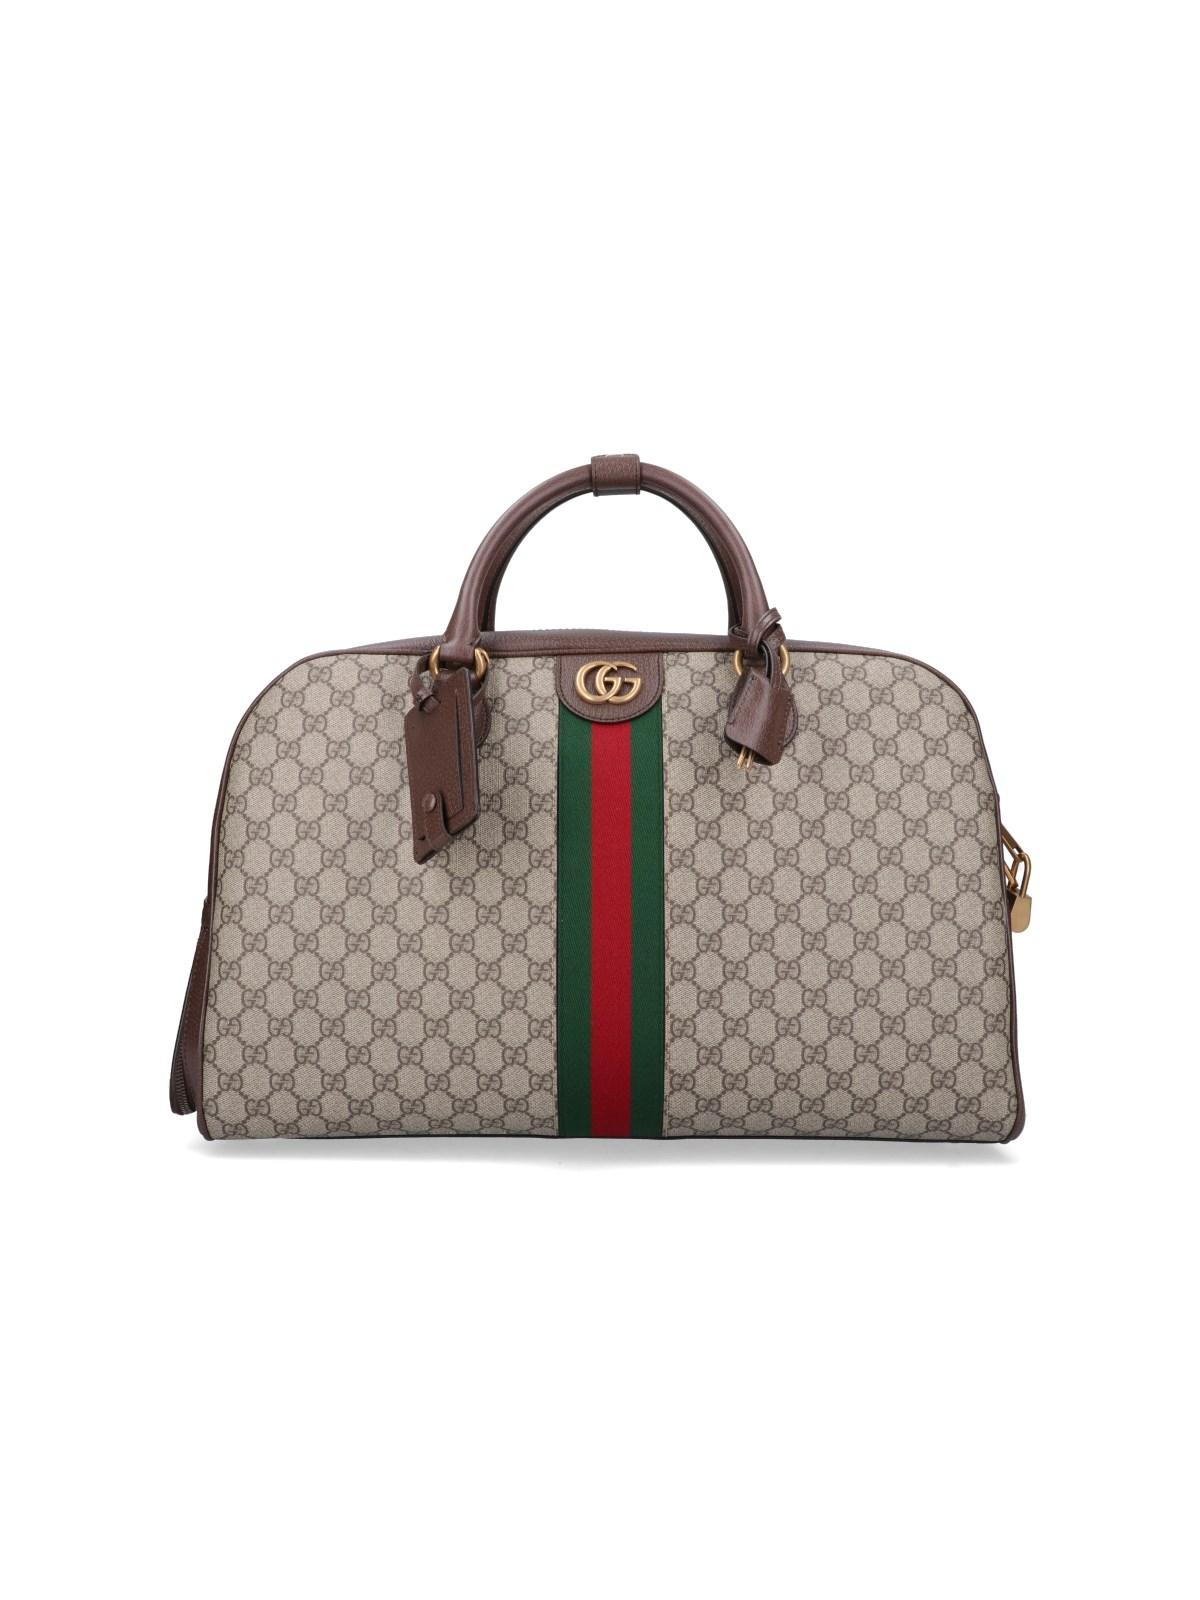 Gucci Savoy large duffle bag in red leather